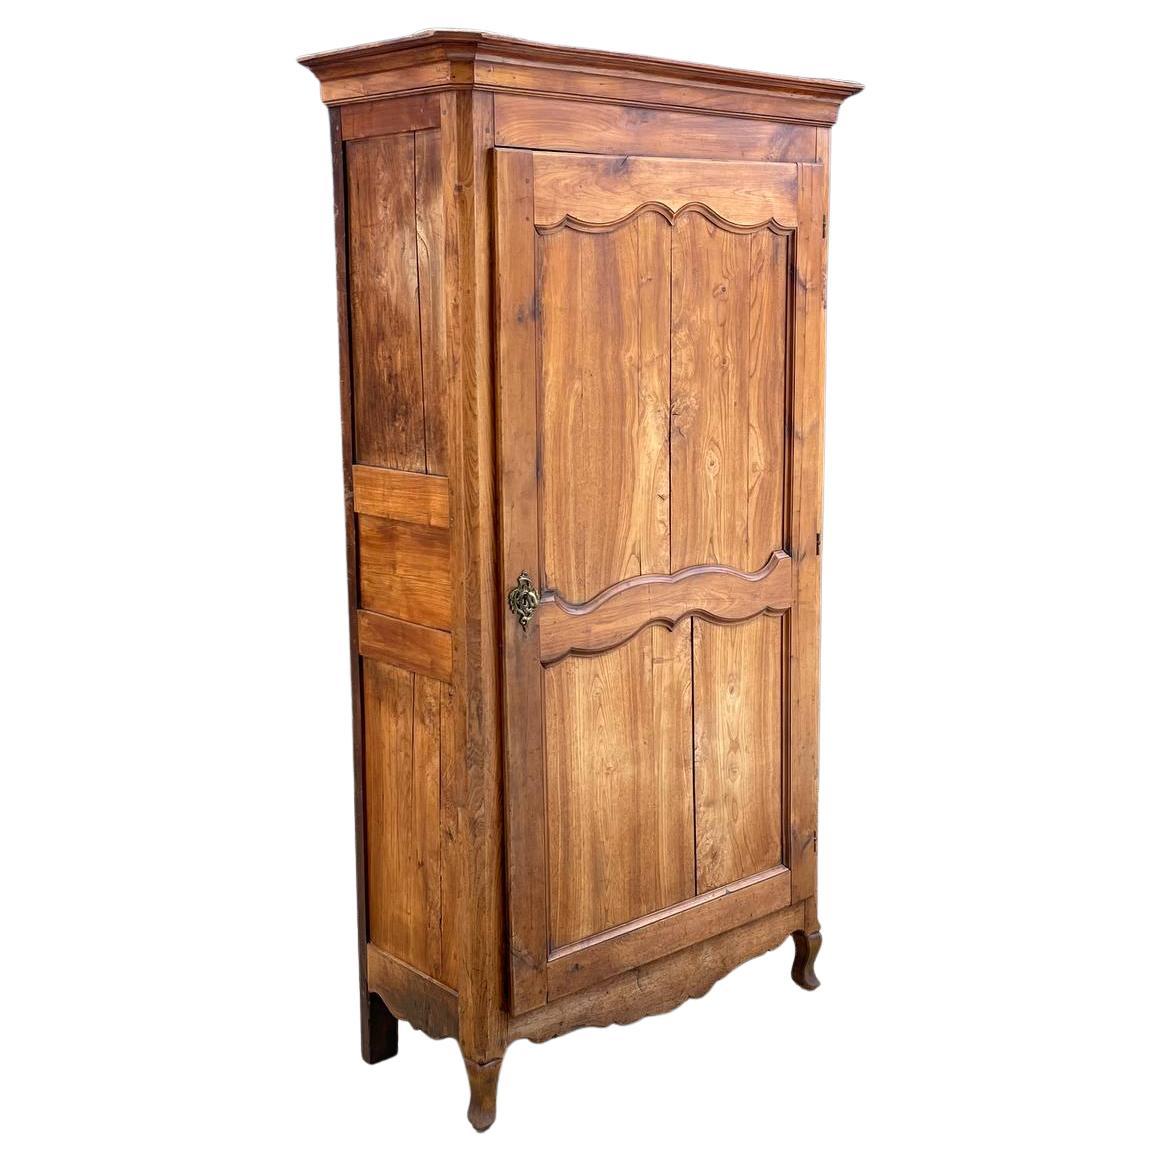 Antique French Provincial Solid Wood Armoire with Key